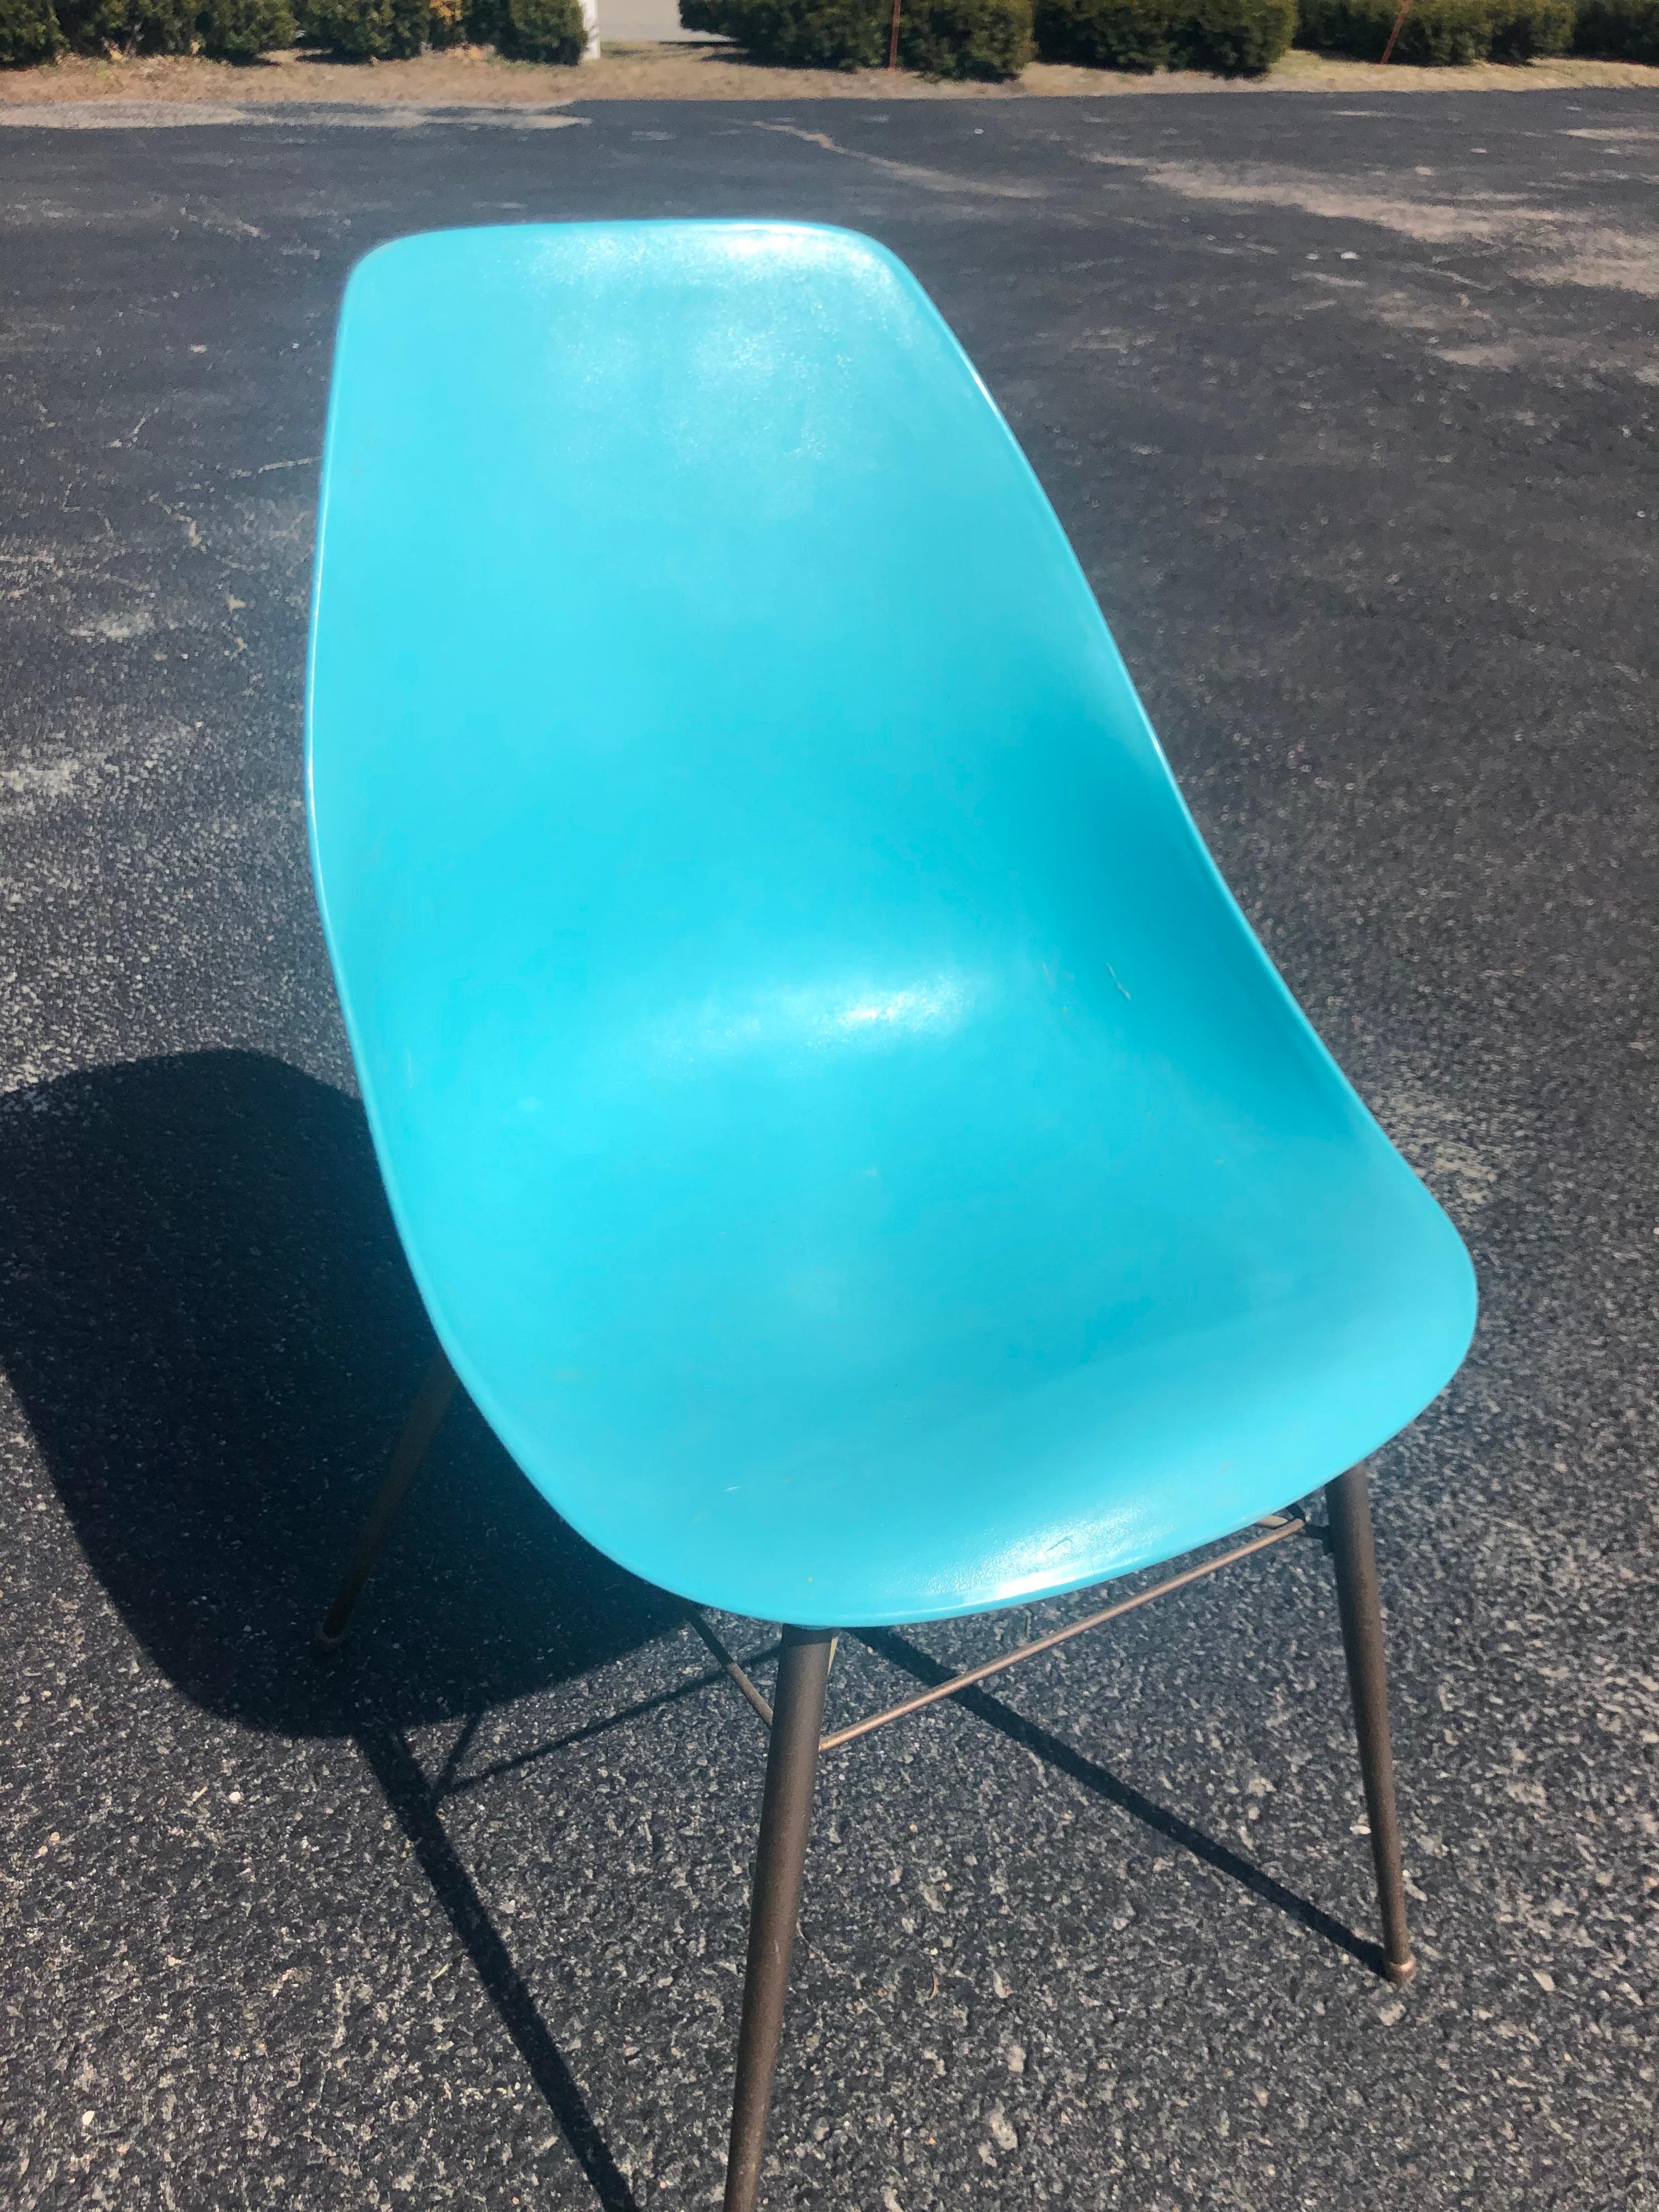 Mid century Turquoise shell chair. Fun pop of color. Perfect for a childs desk.